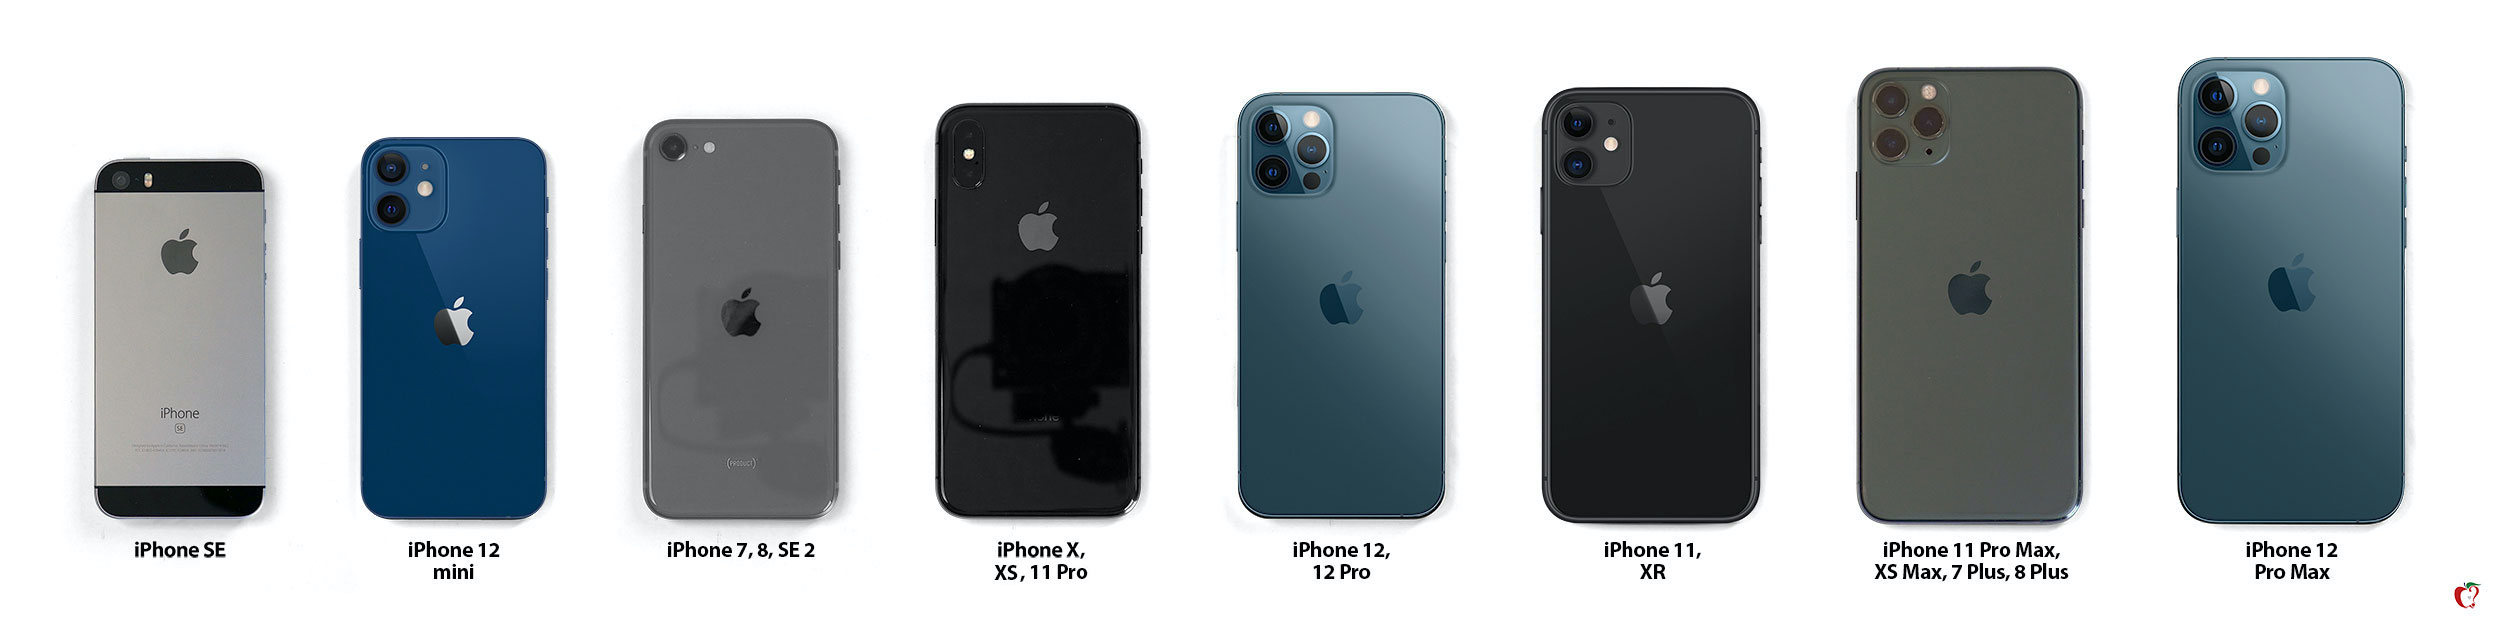 iPhone 12, Mini, and Max Size Comparison All iPhone Models Side by